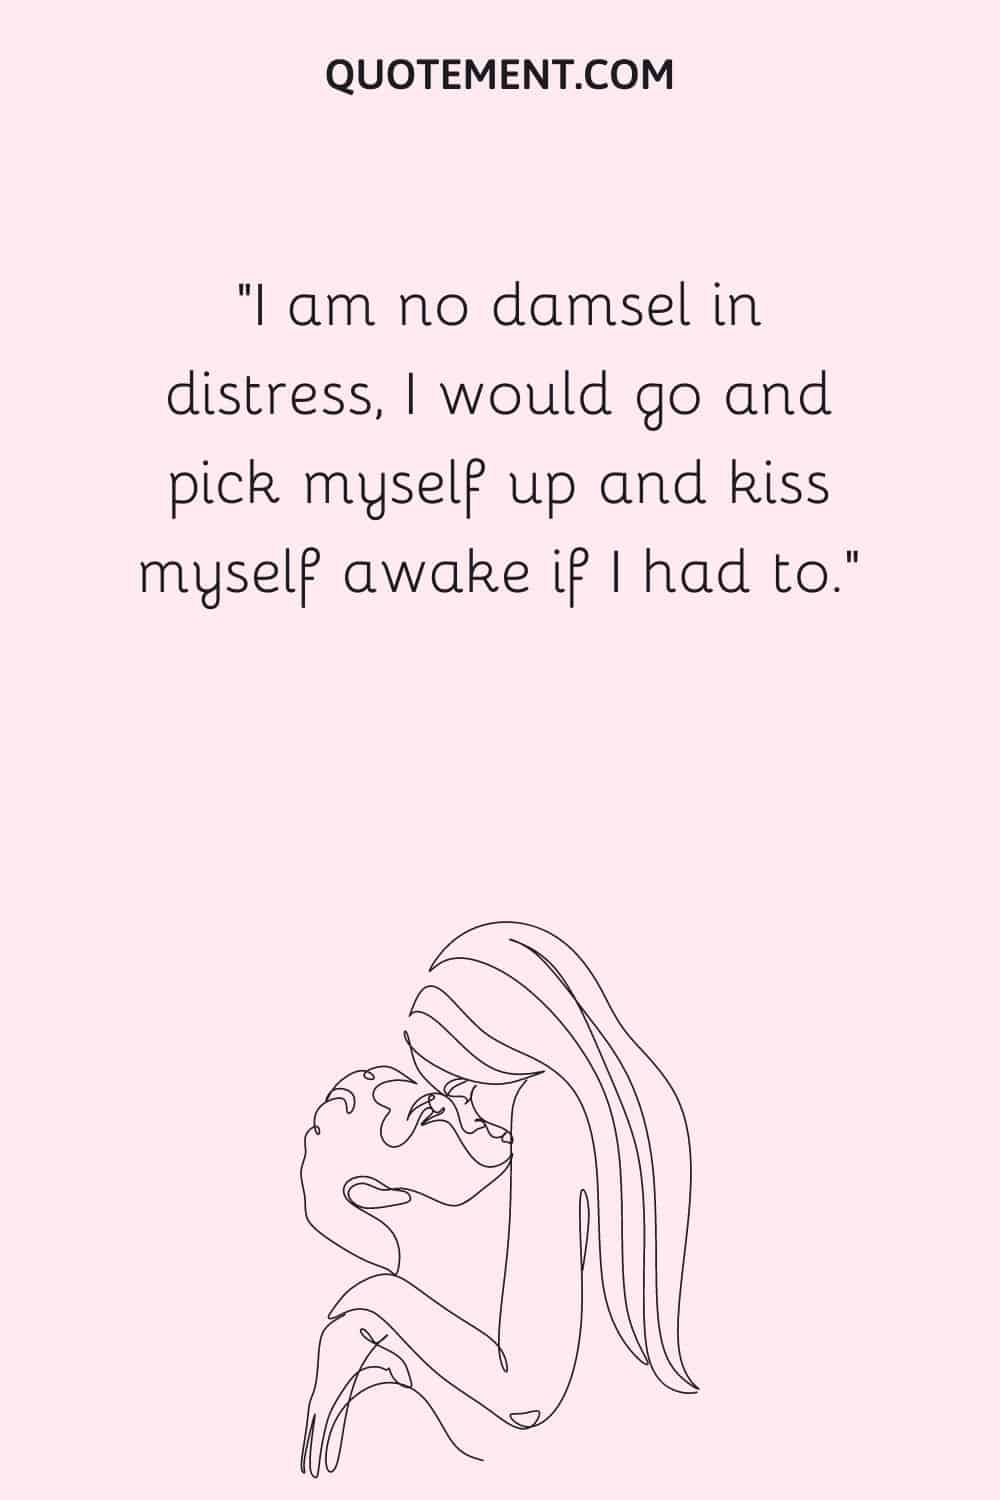 I am no damsel in distress, I would go and pick myself up and kiss myself awake if I had to.